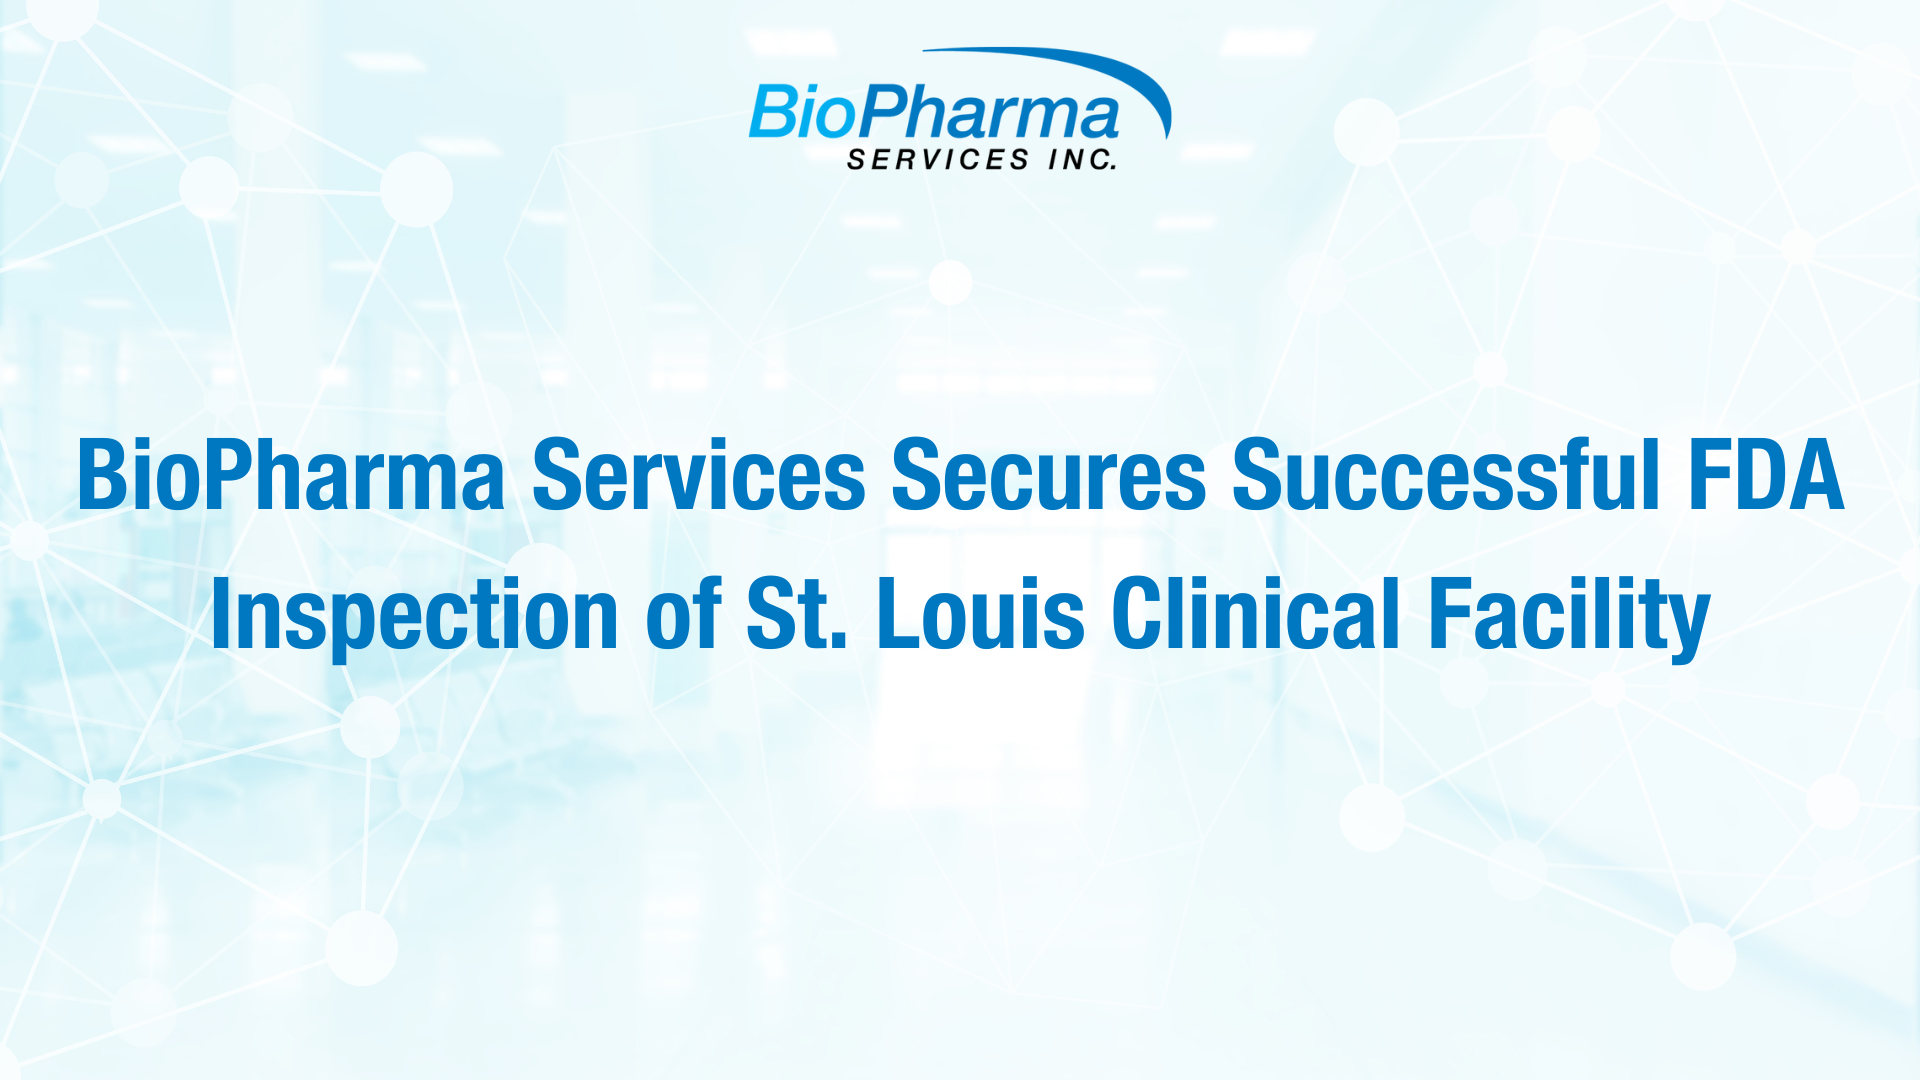 BioPharma Services Secures Successful FDA Inspection of St. Louis Clinical Facility Blog Image.